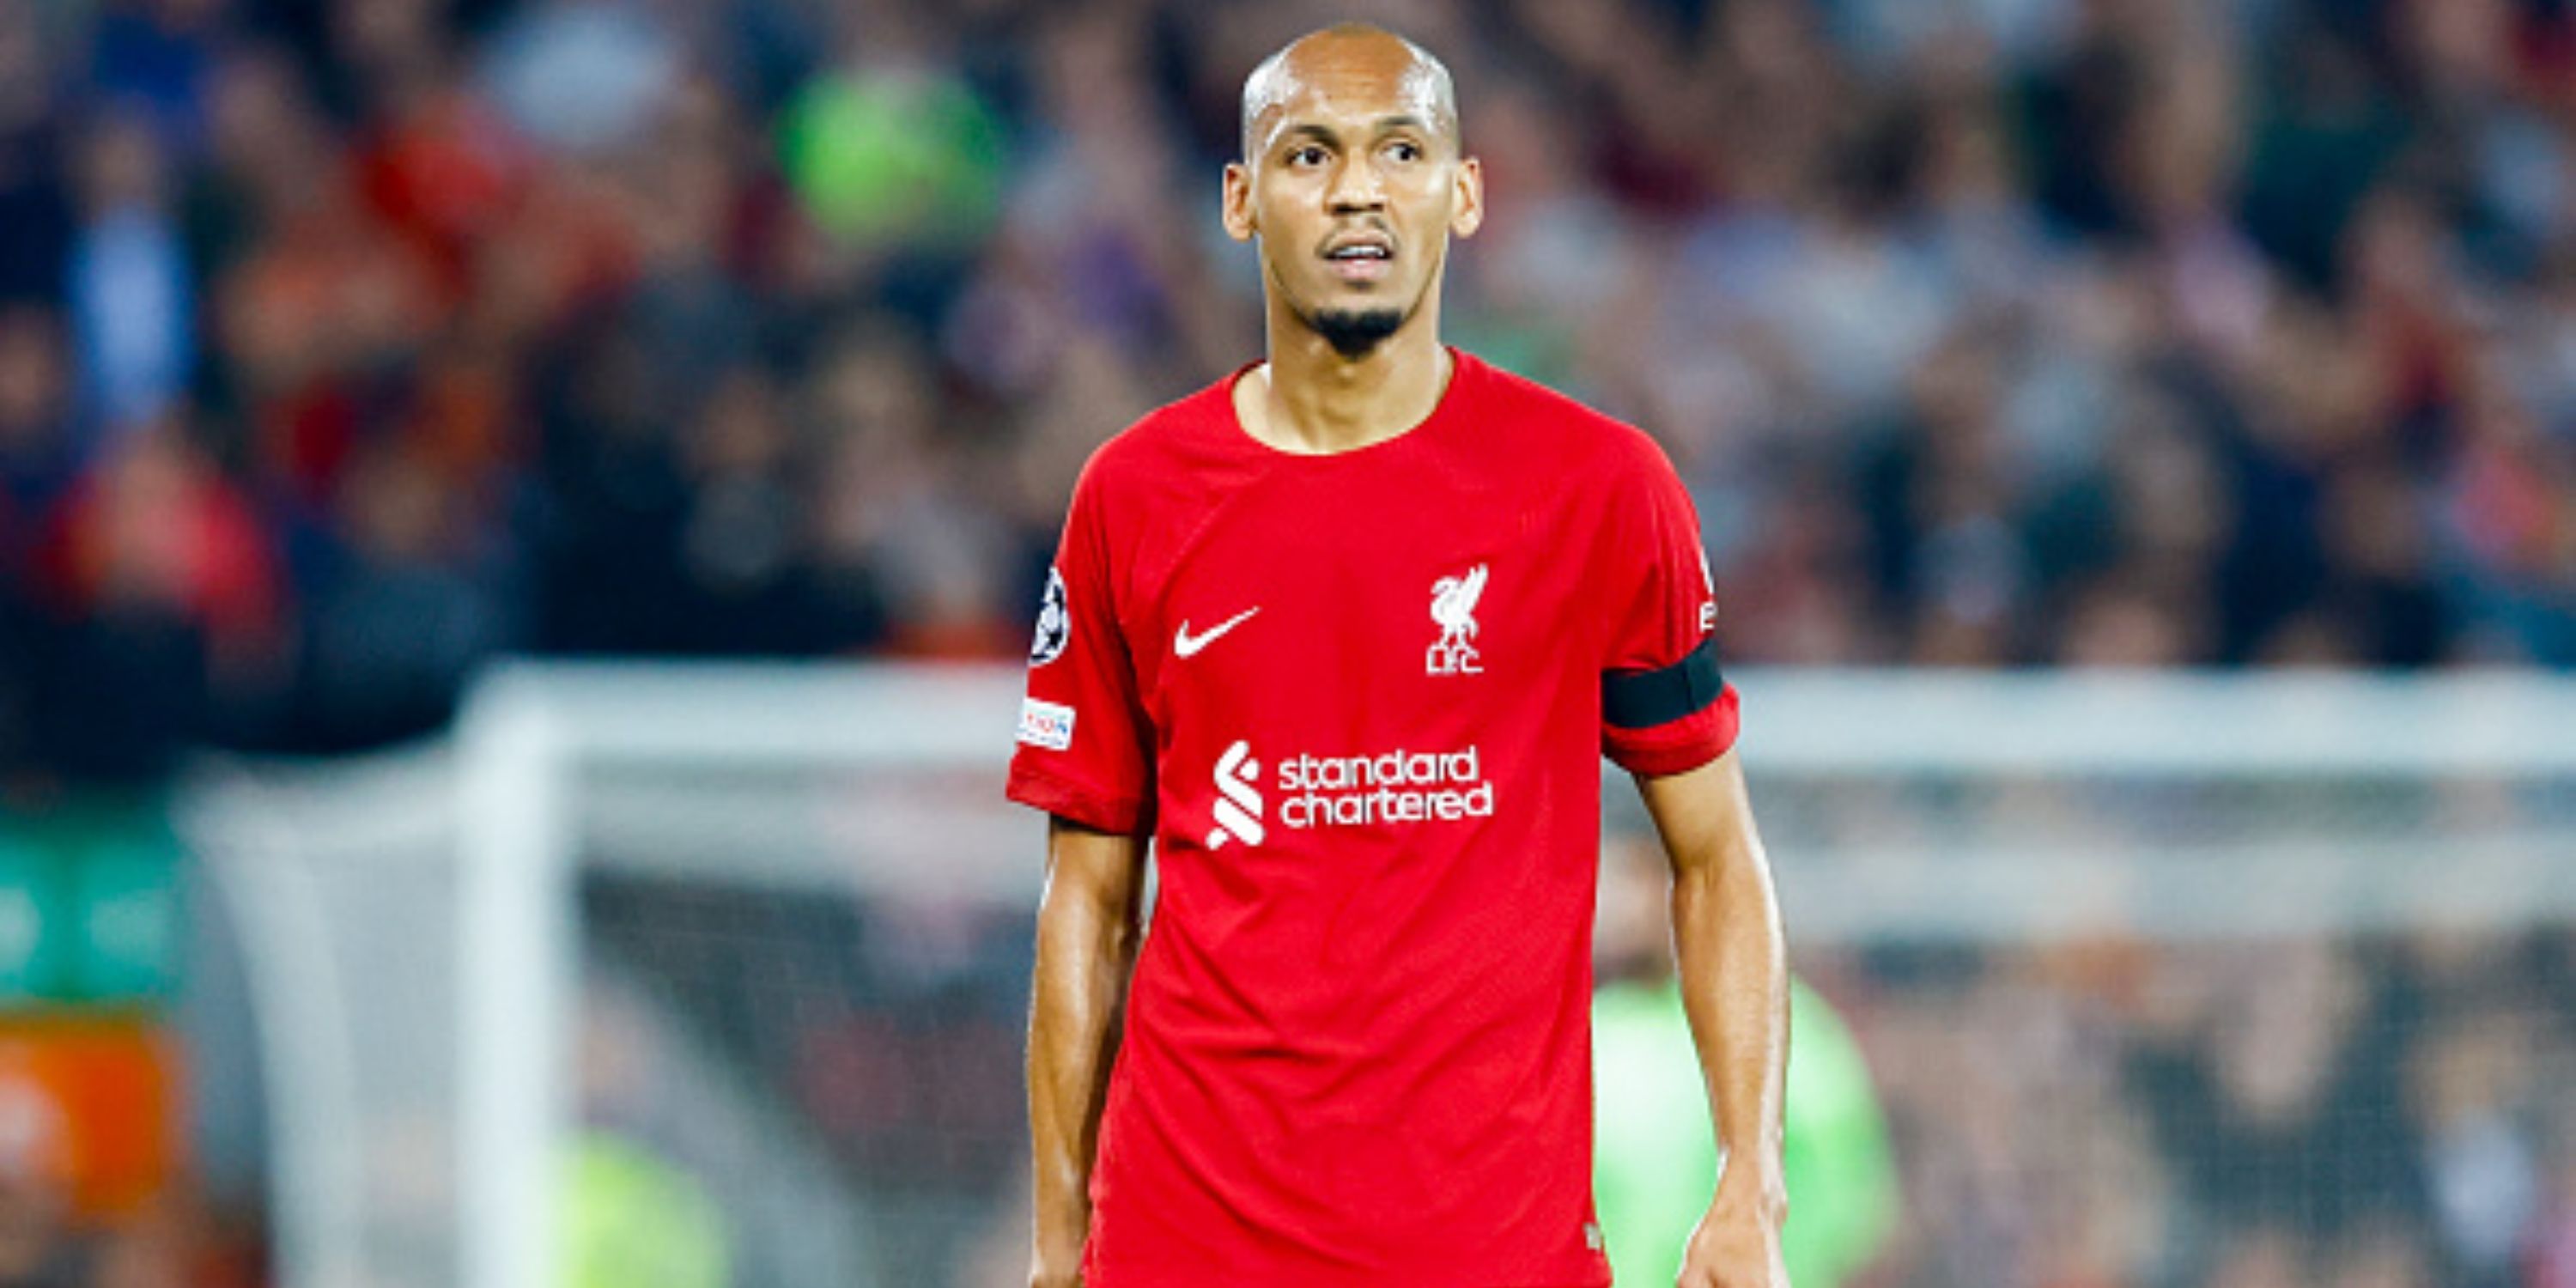 Fabinho in action for Liverpool